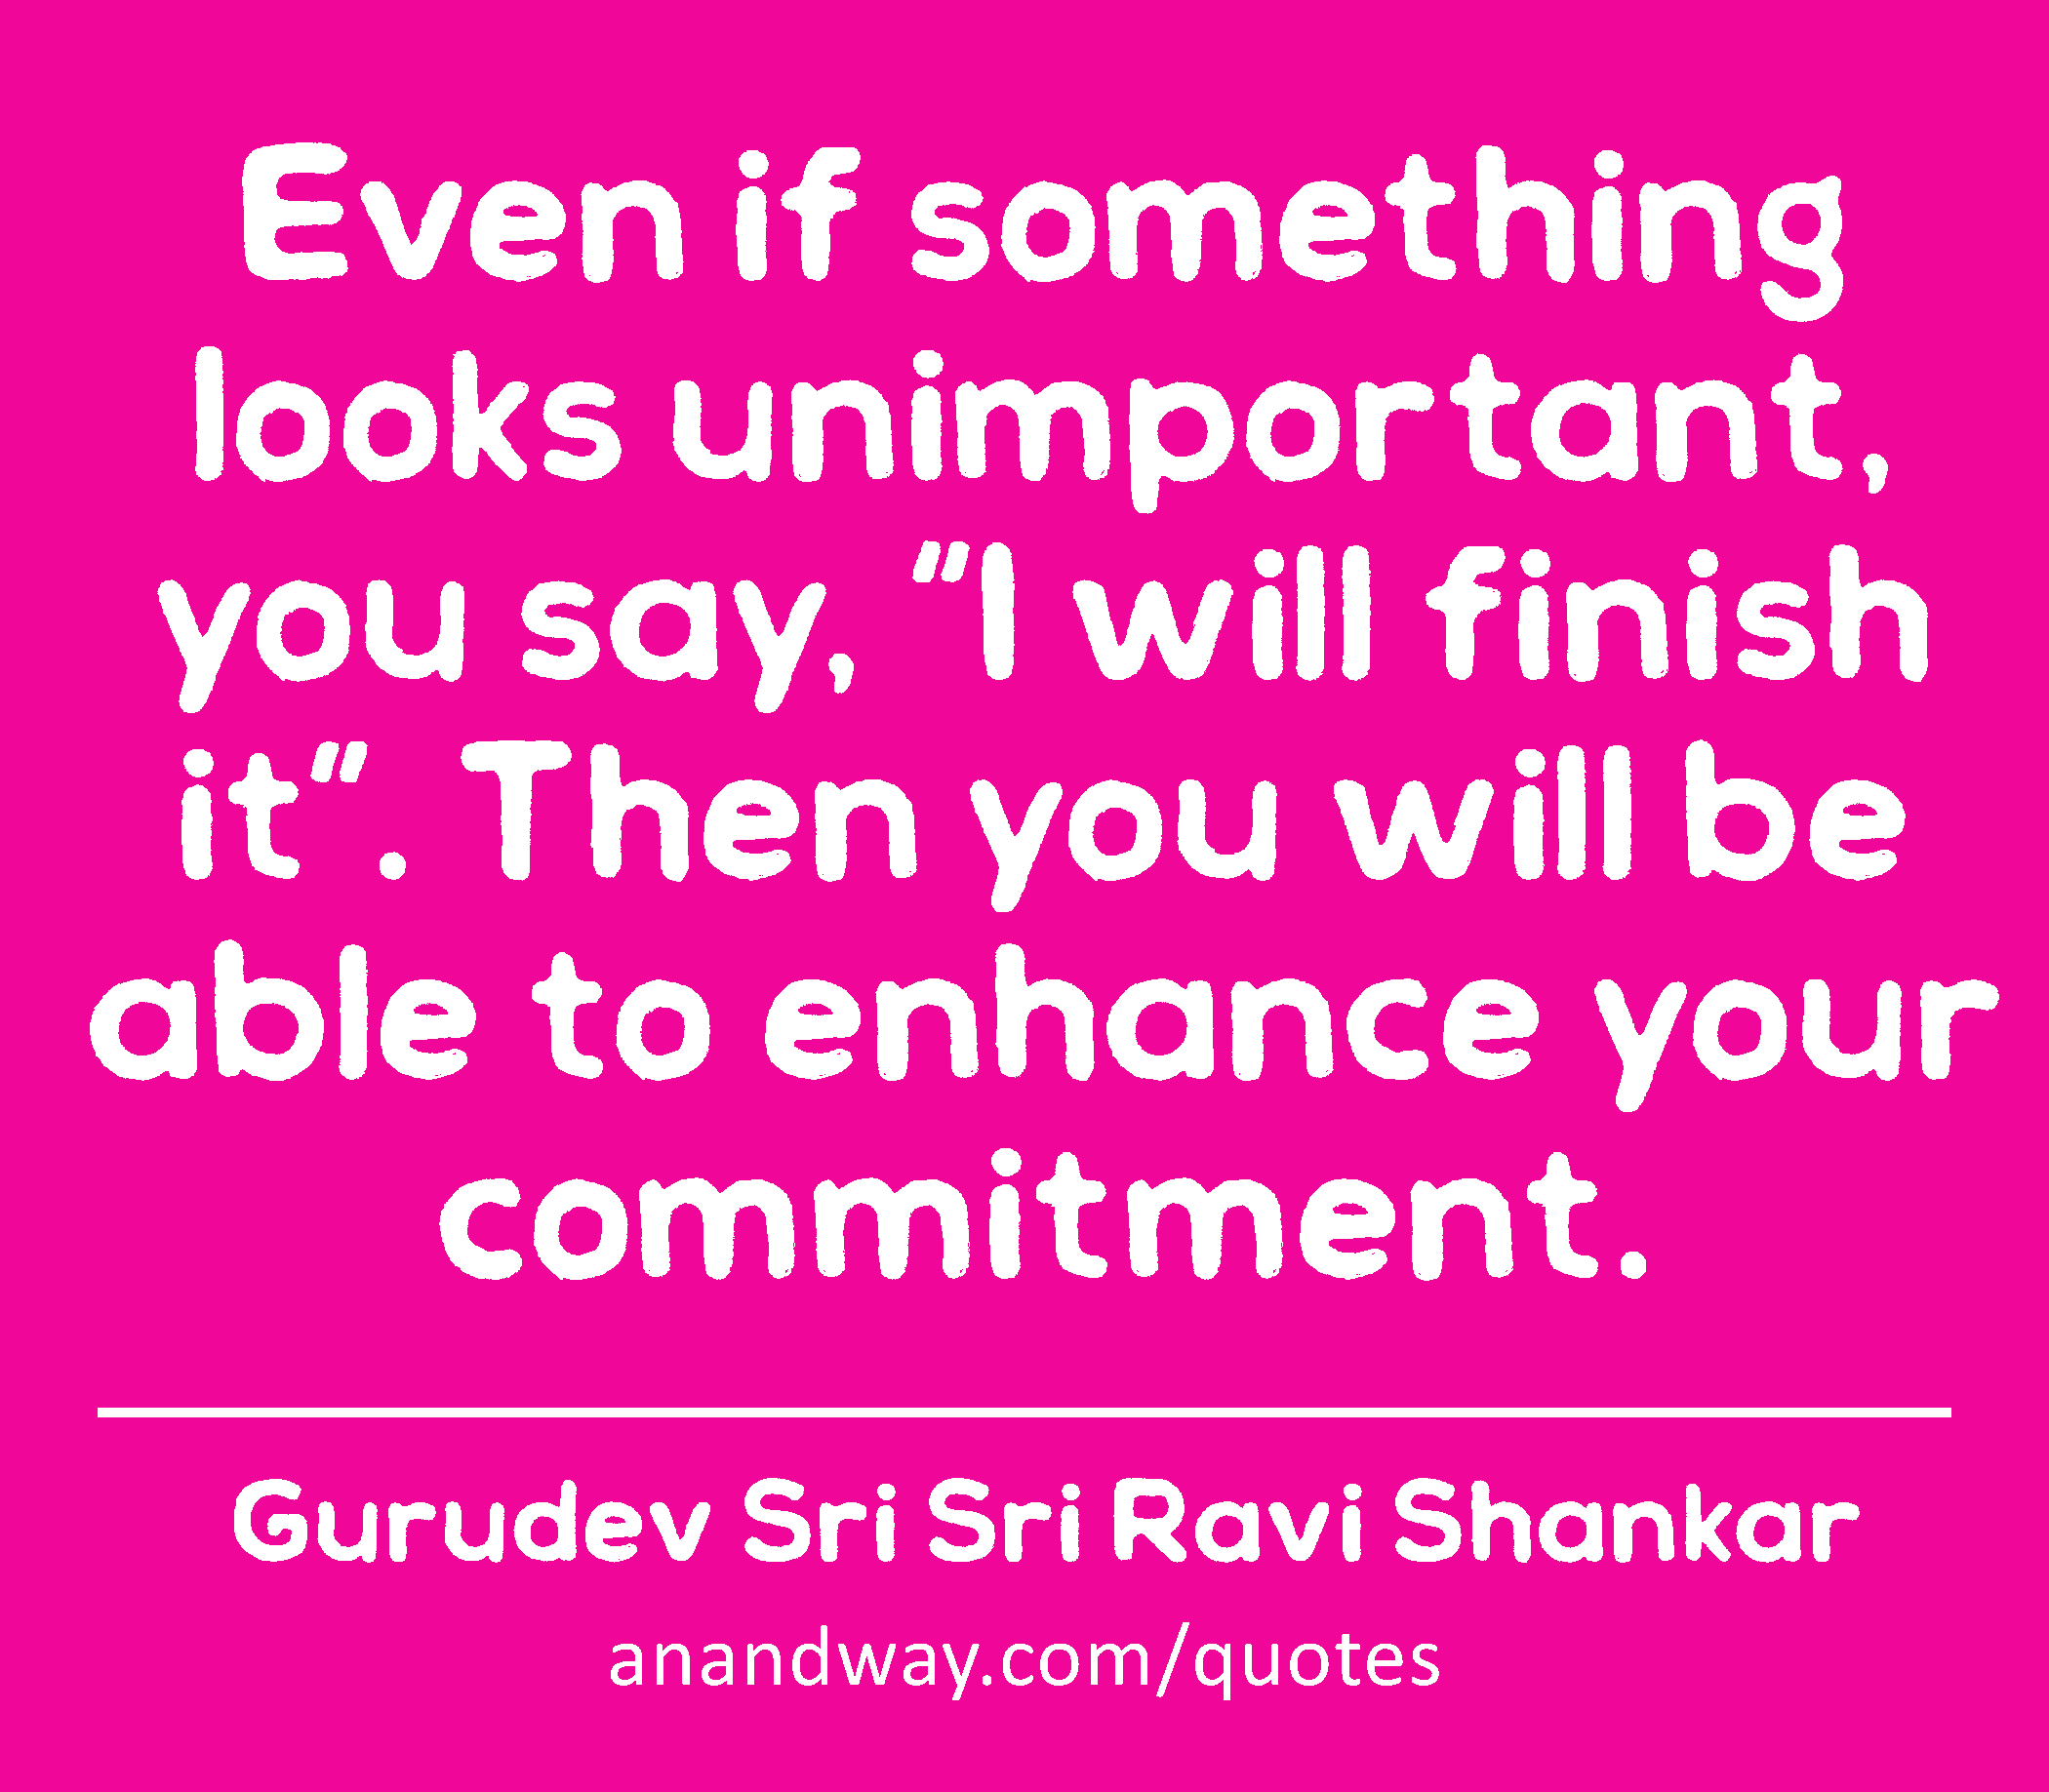 Even if something looks unimportant, you say, “I will finish it”. Then you will be able to enhance
 -Gurudev Sri Sri Ravi Shankar